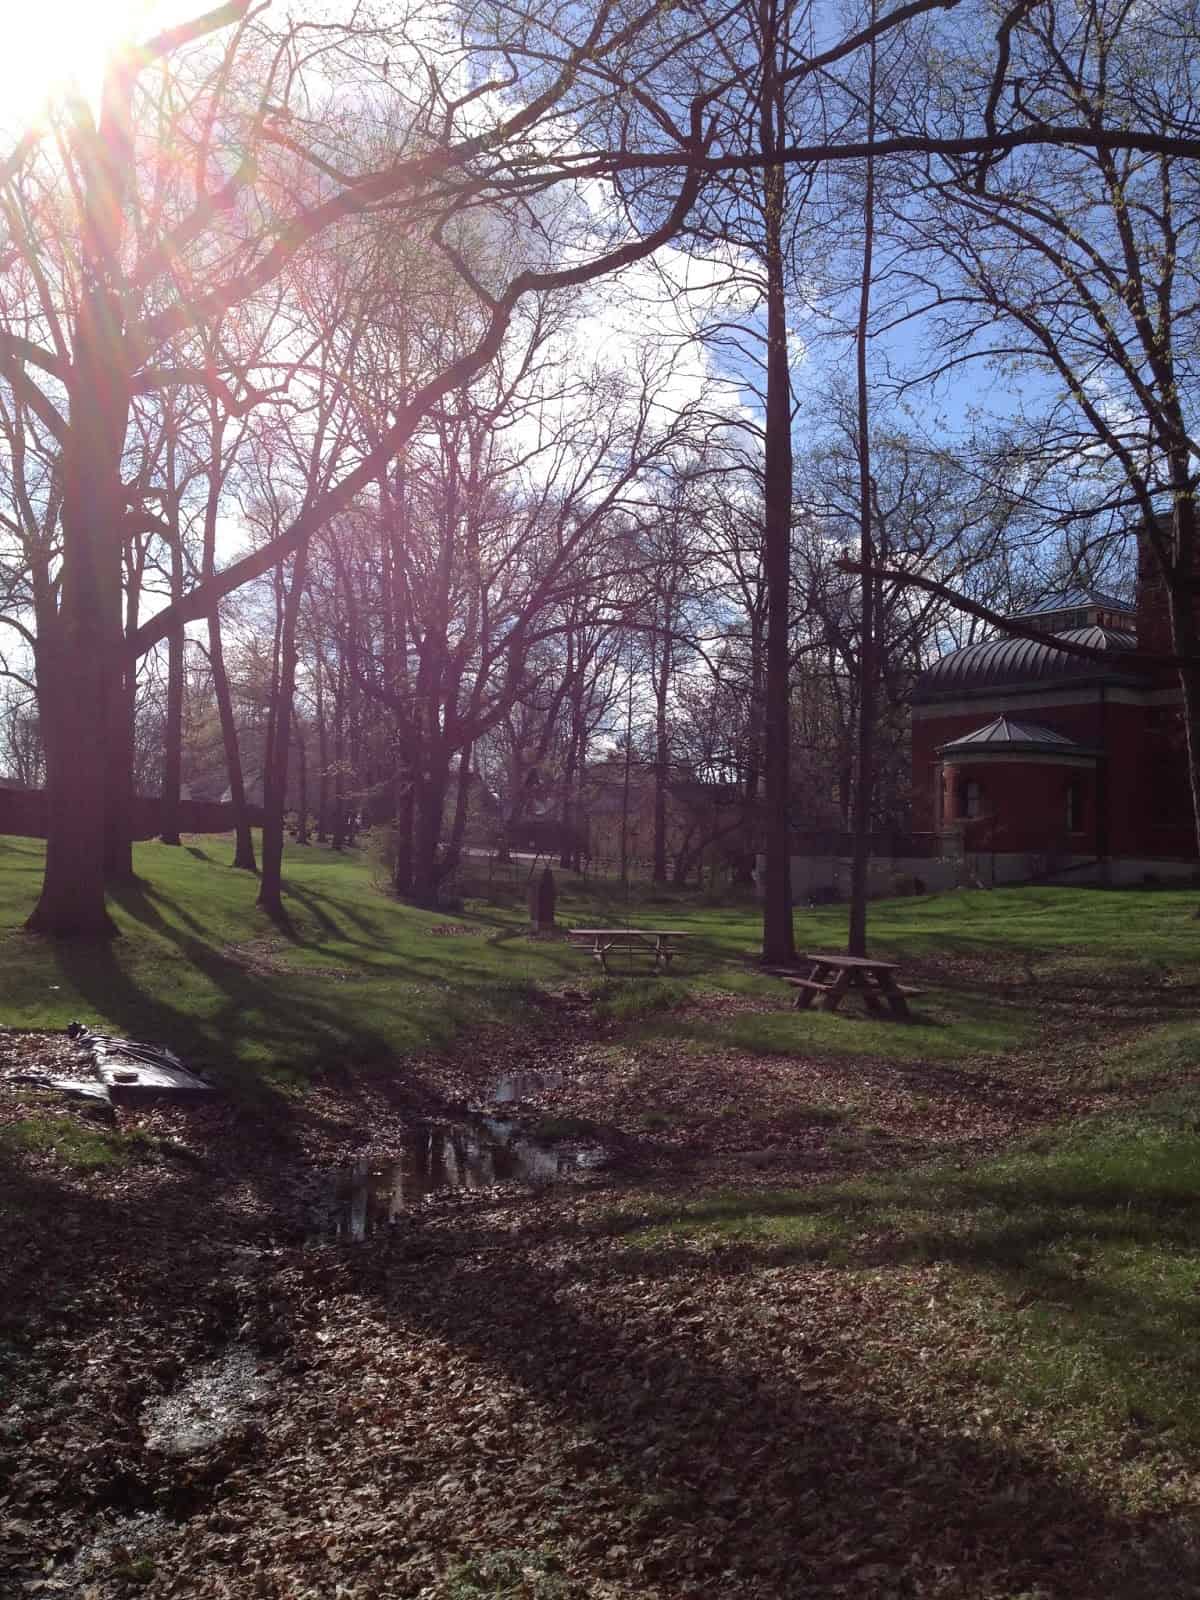 The depressed area of the Study grounds where the reflecting pool was located; it is full of rainwater.